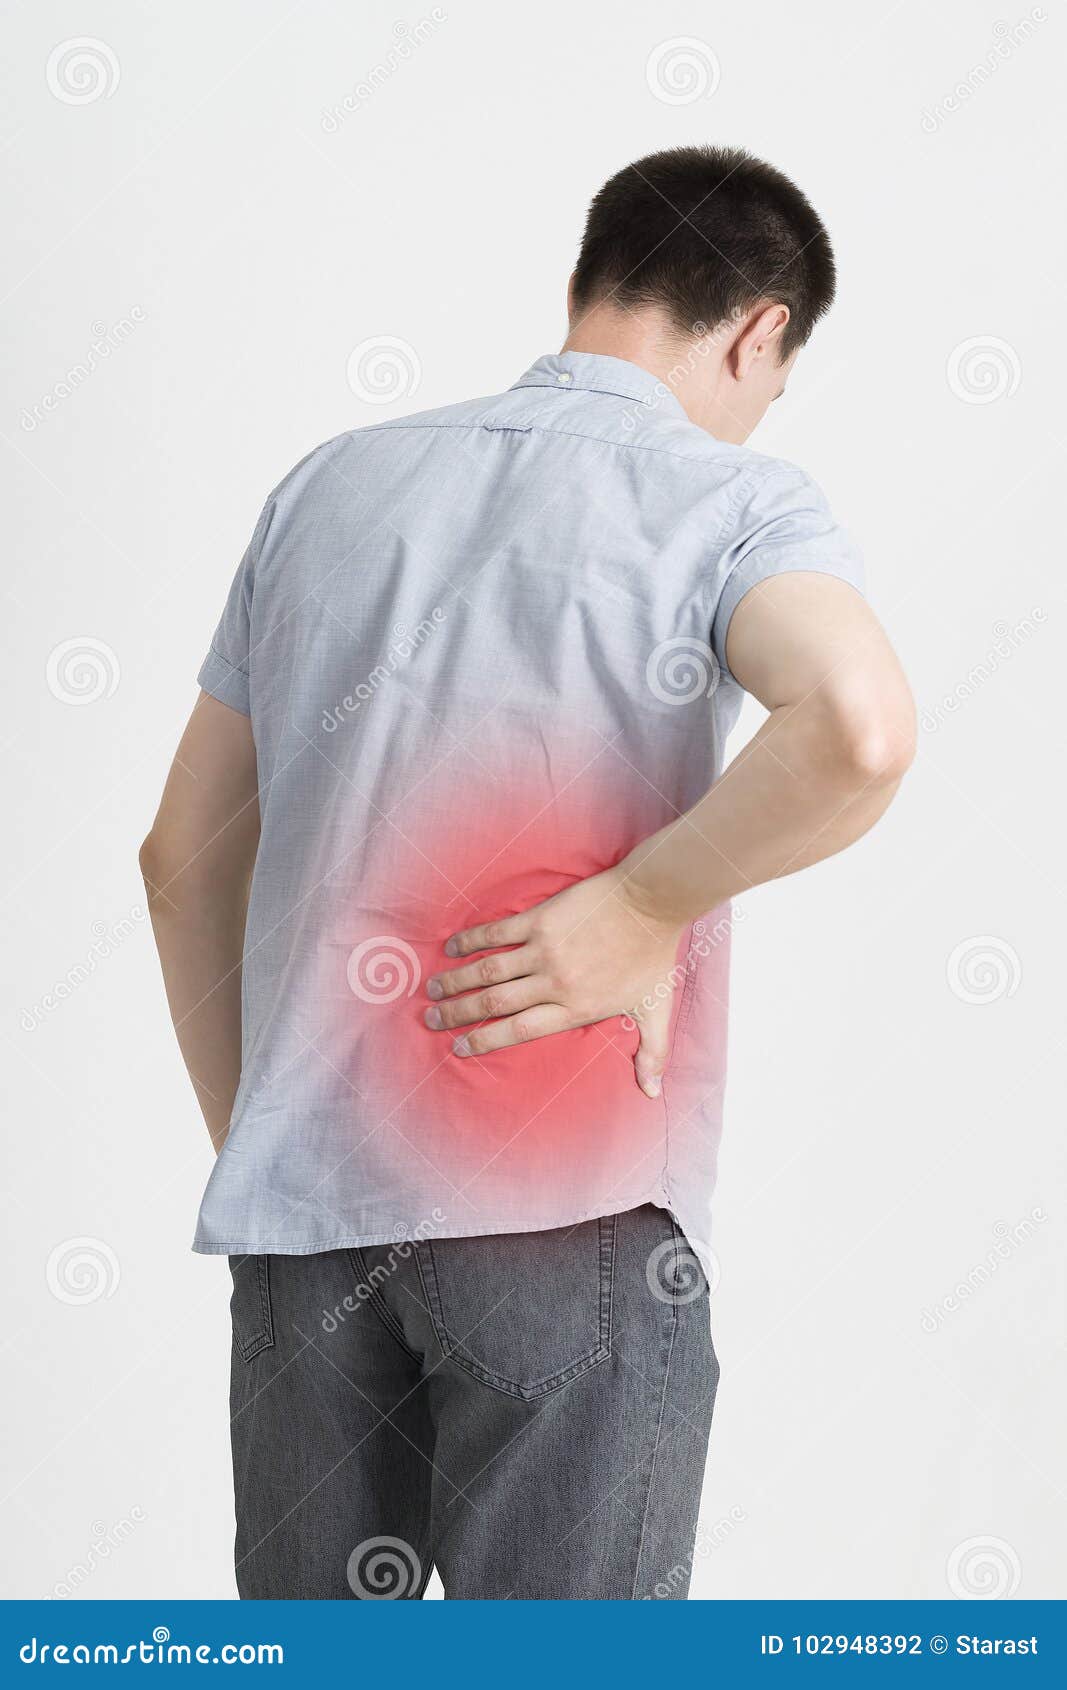 back pain, kidney inflammation, ache in man`s body